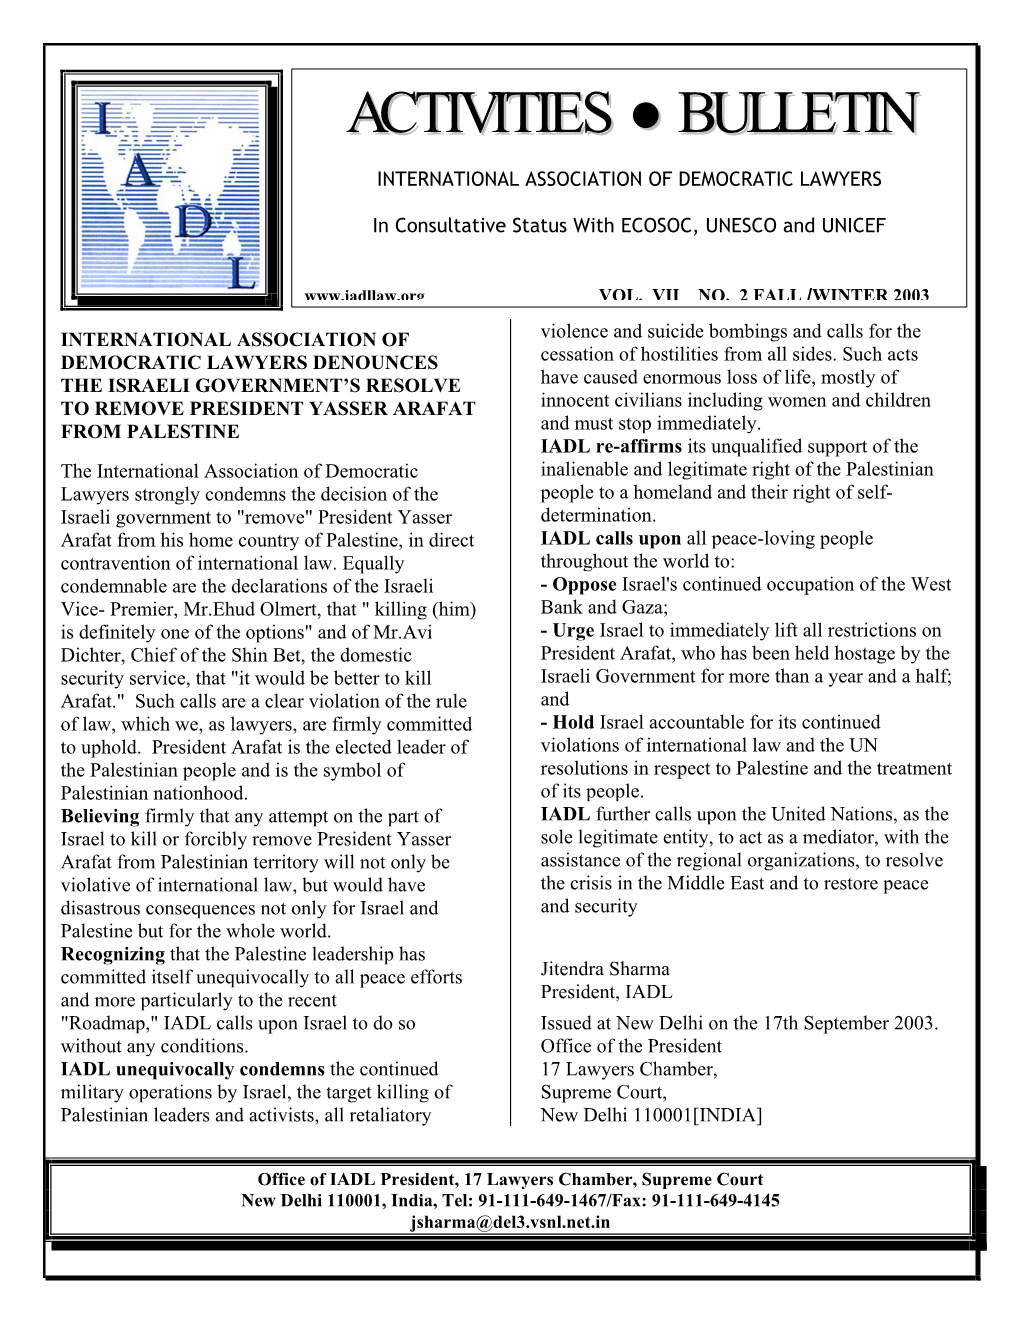 Activities Bulletin, Published Periodically